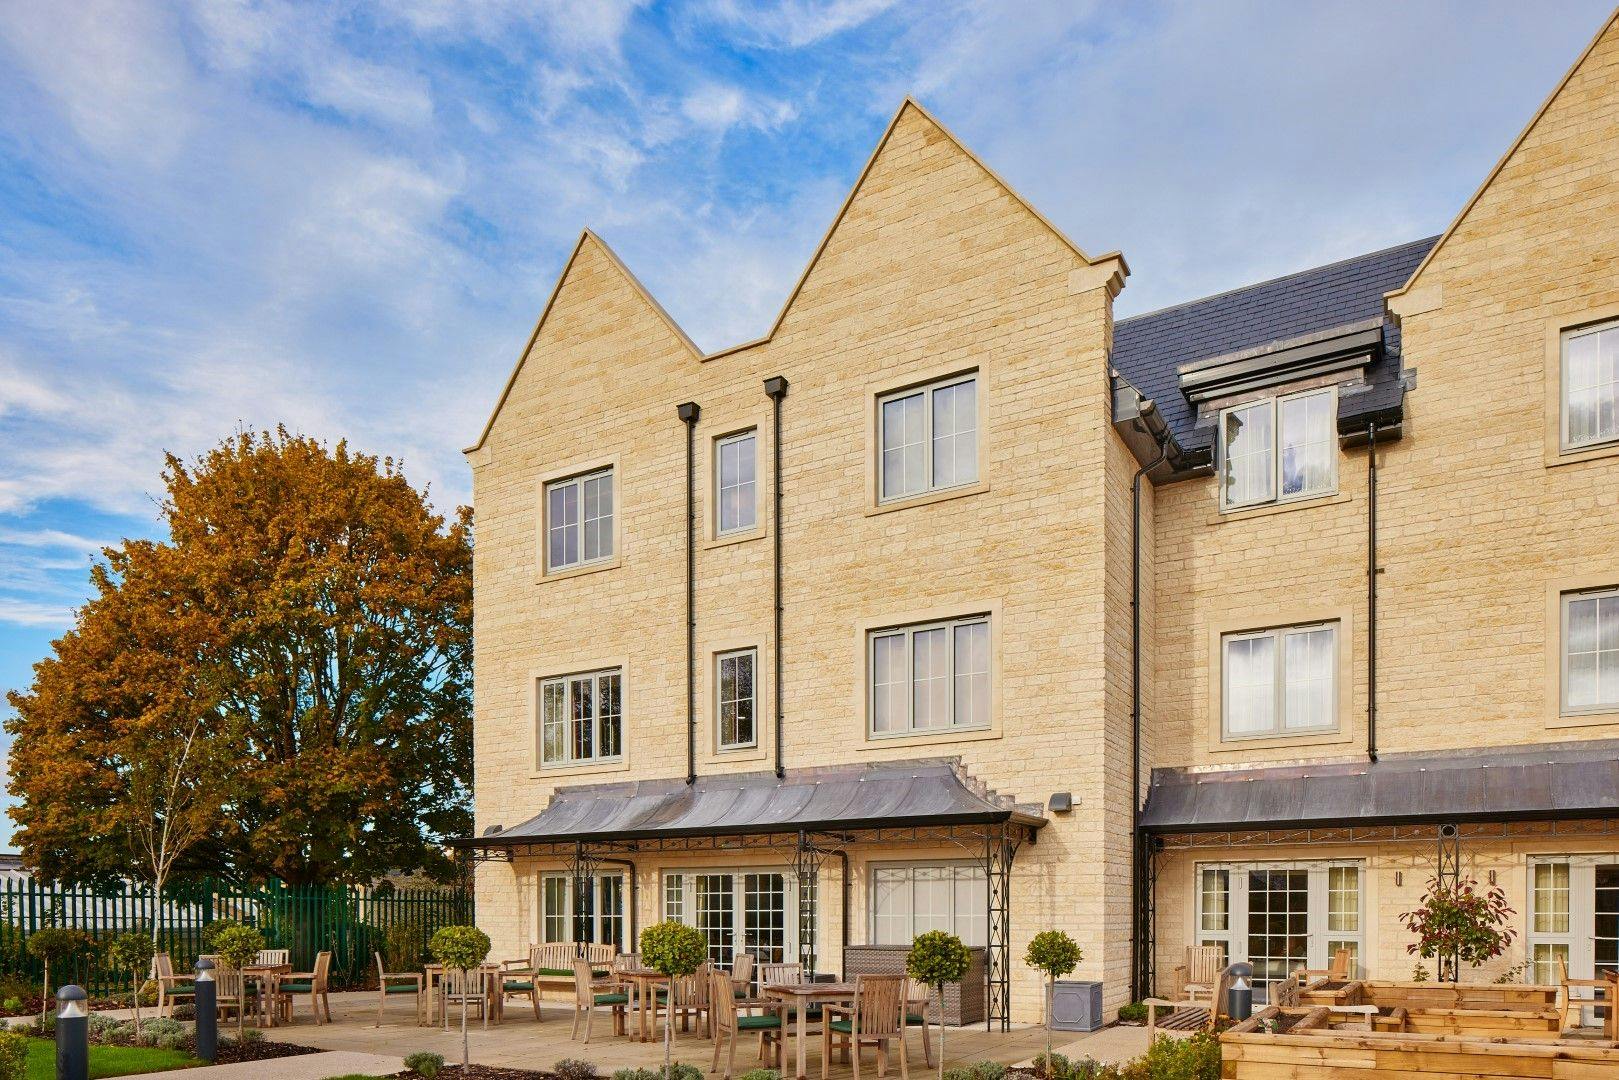 Exterior of Midford Manor Care Home in Bath, Somerset